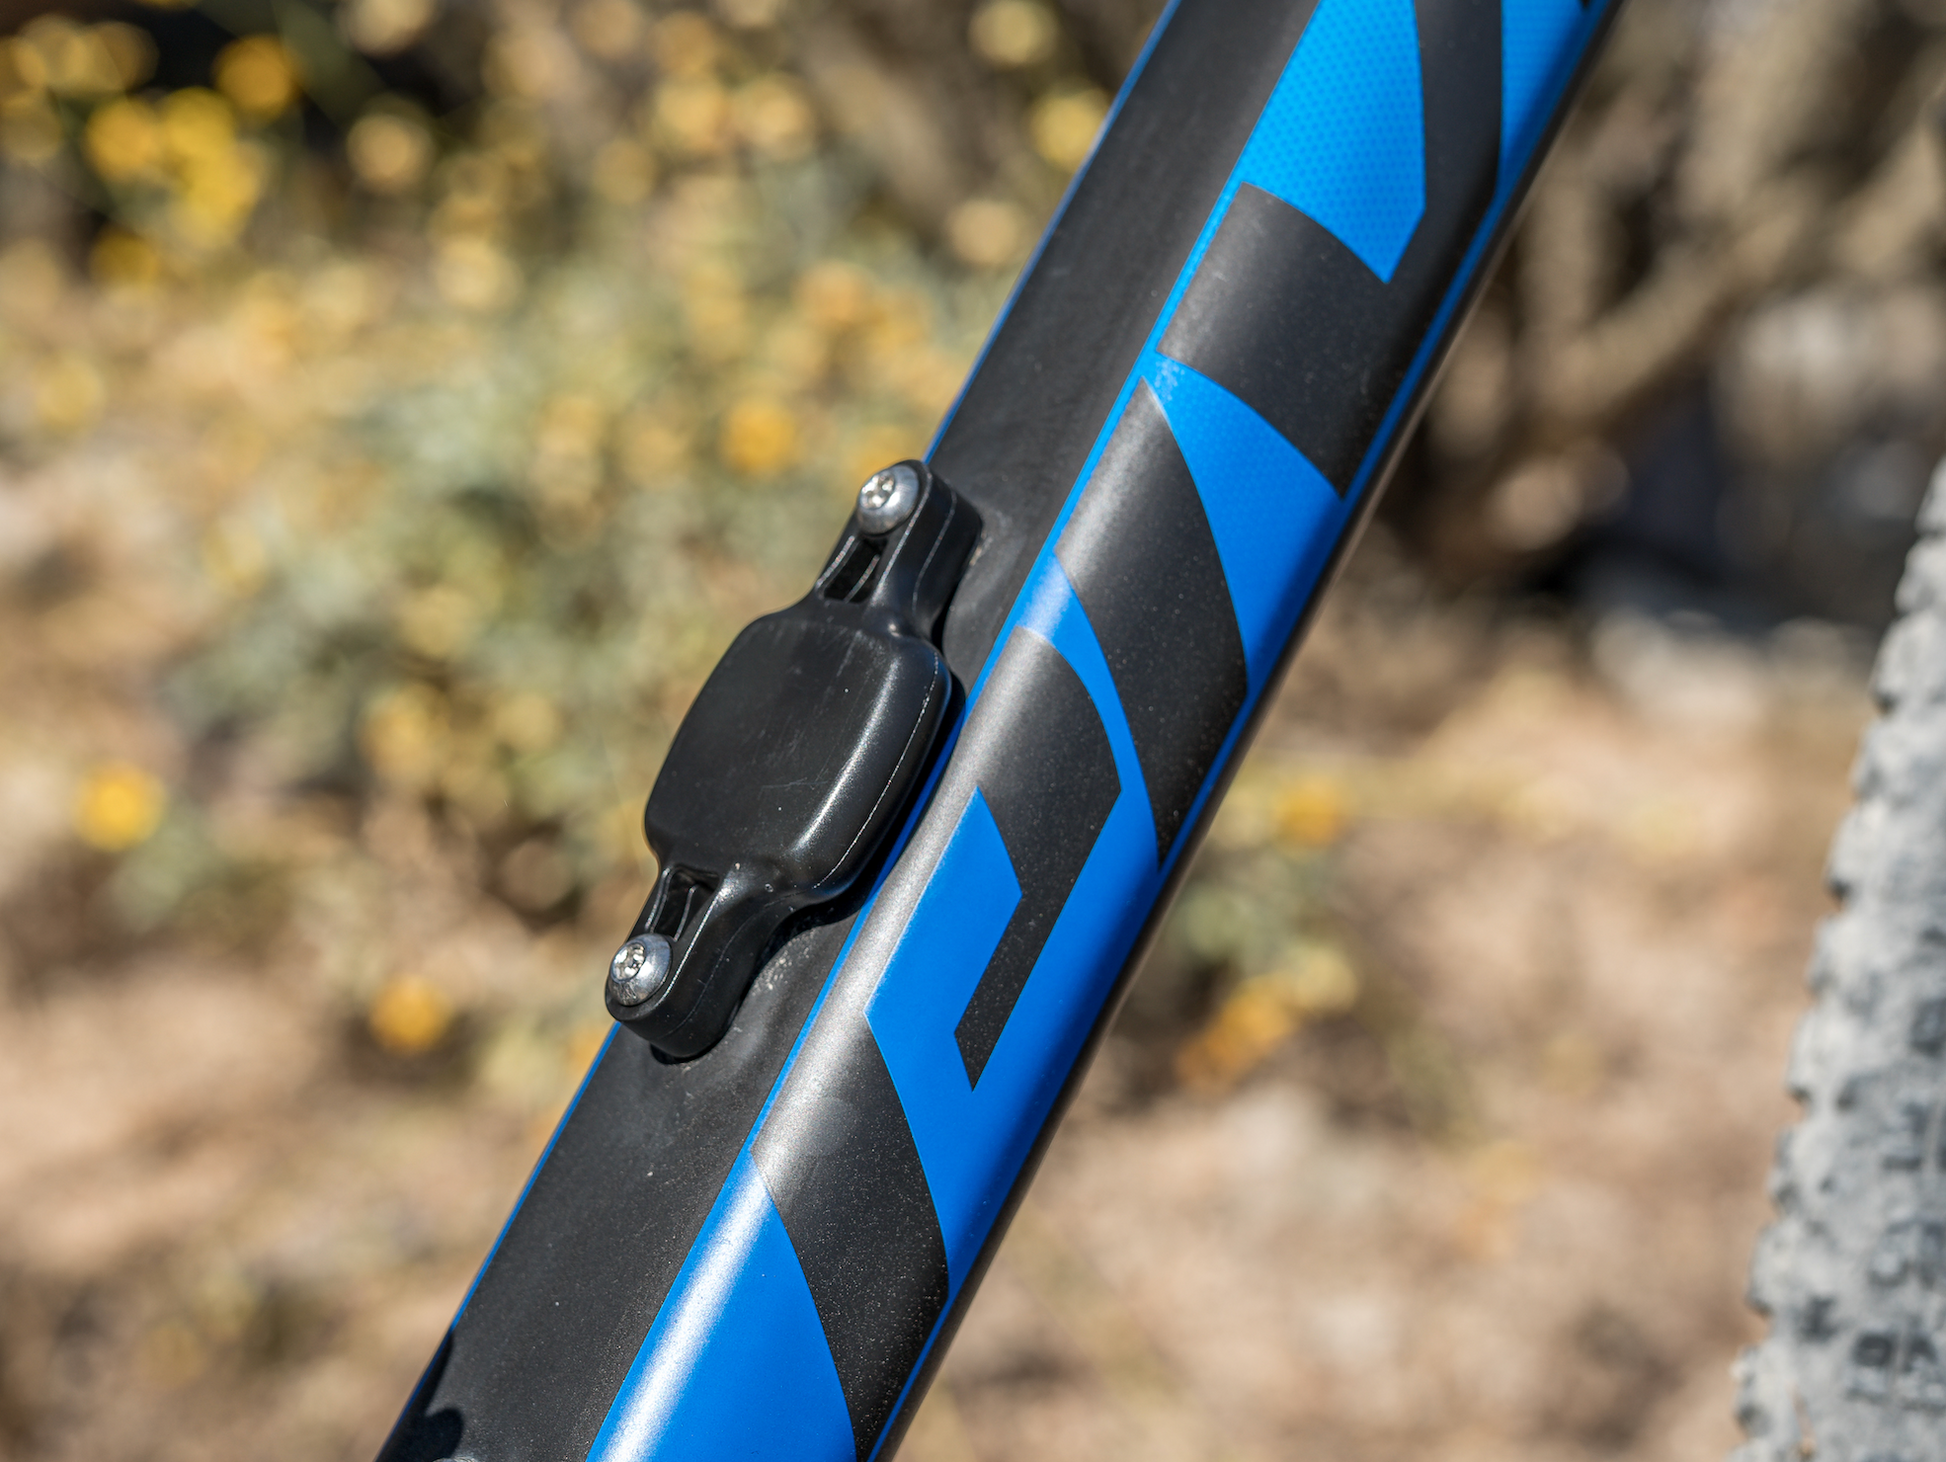 Hello! I designed a Bottle Cage mount for the all-new Apple Airtag